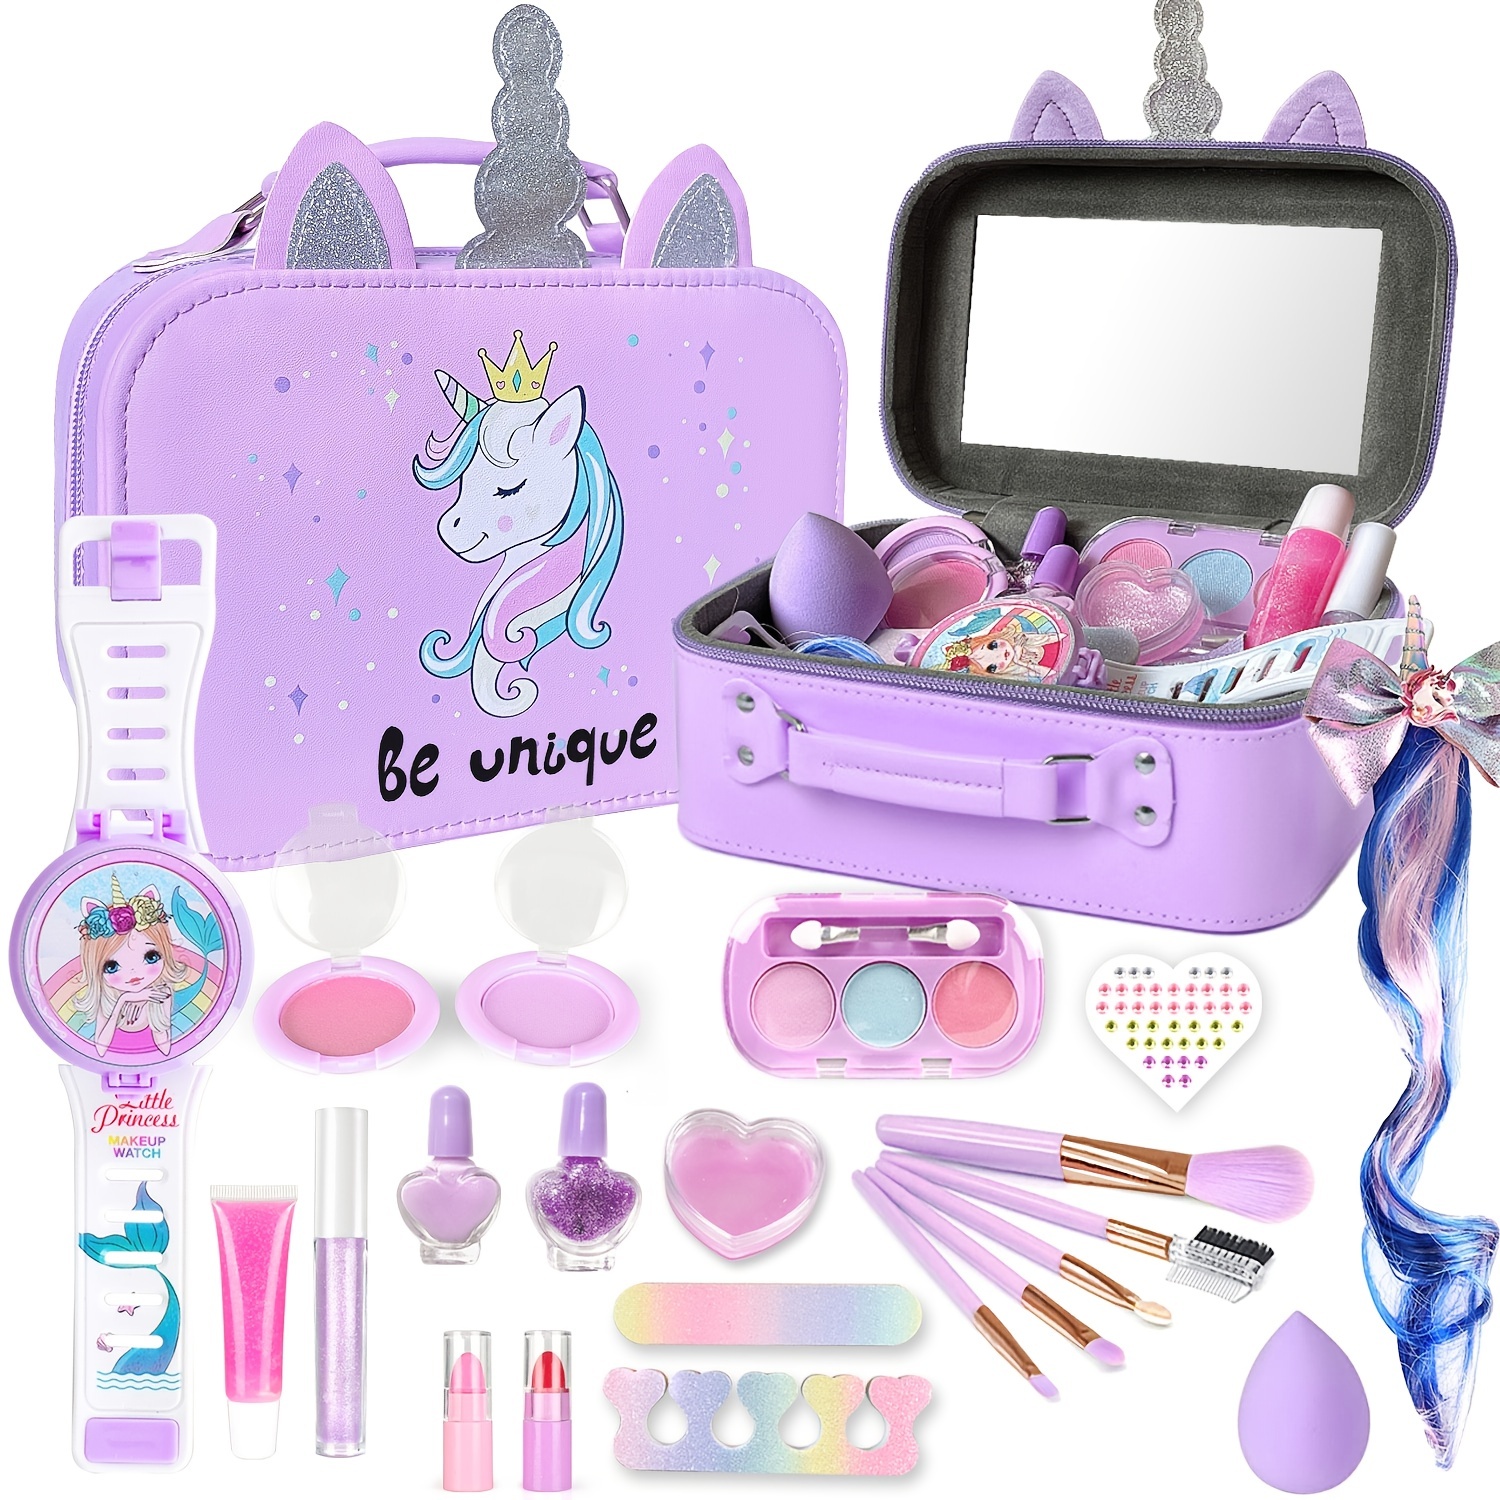 Kids Real Makeup Kit For Little Girls: With Unicorn Bag - Real, Non Toxic,  Washable Make Up Toy - Gift For Toddler Young Children Pretend Play Set  Vanity For Ages 3 4